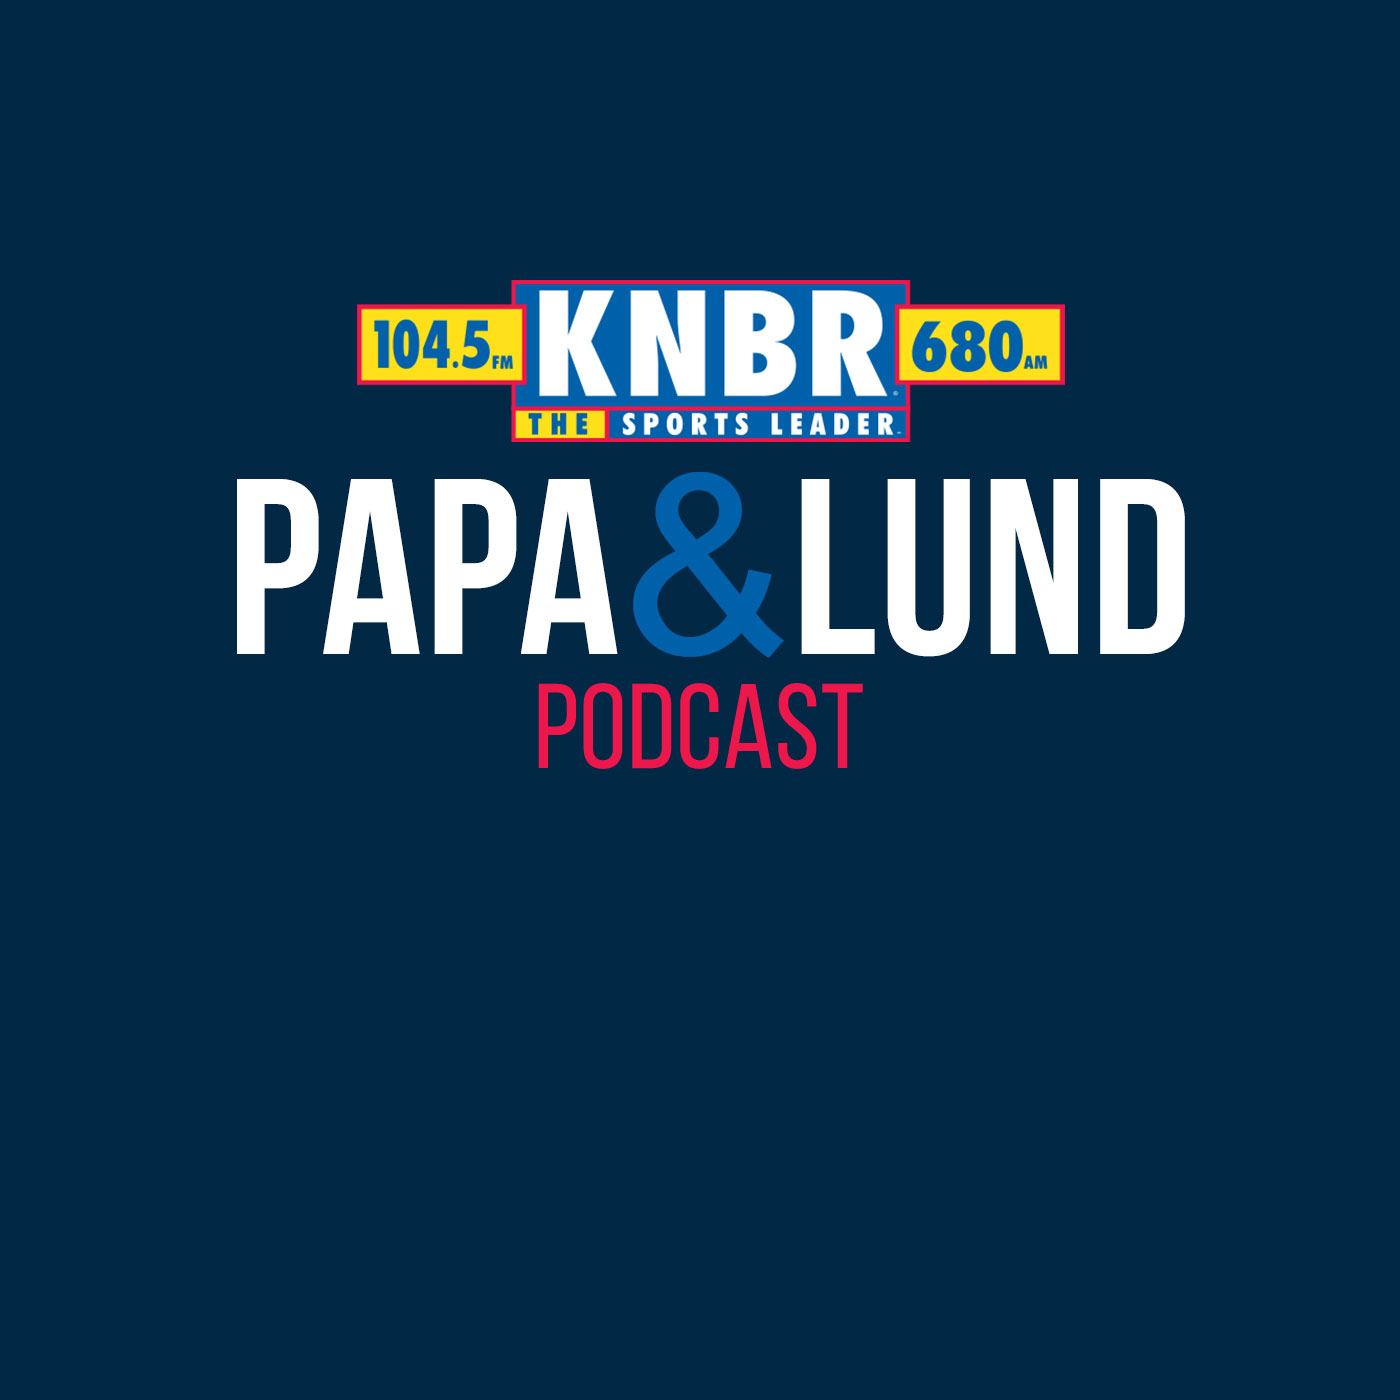 7-1 Sam Amick joins Papa & Lund to discuss the wild first day of NBA free agency and forecasts what may be coming next